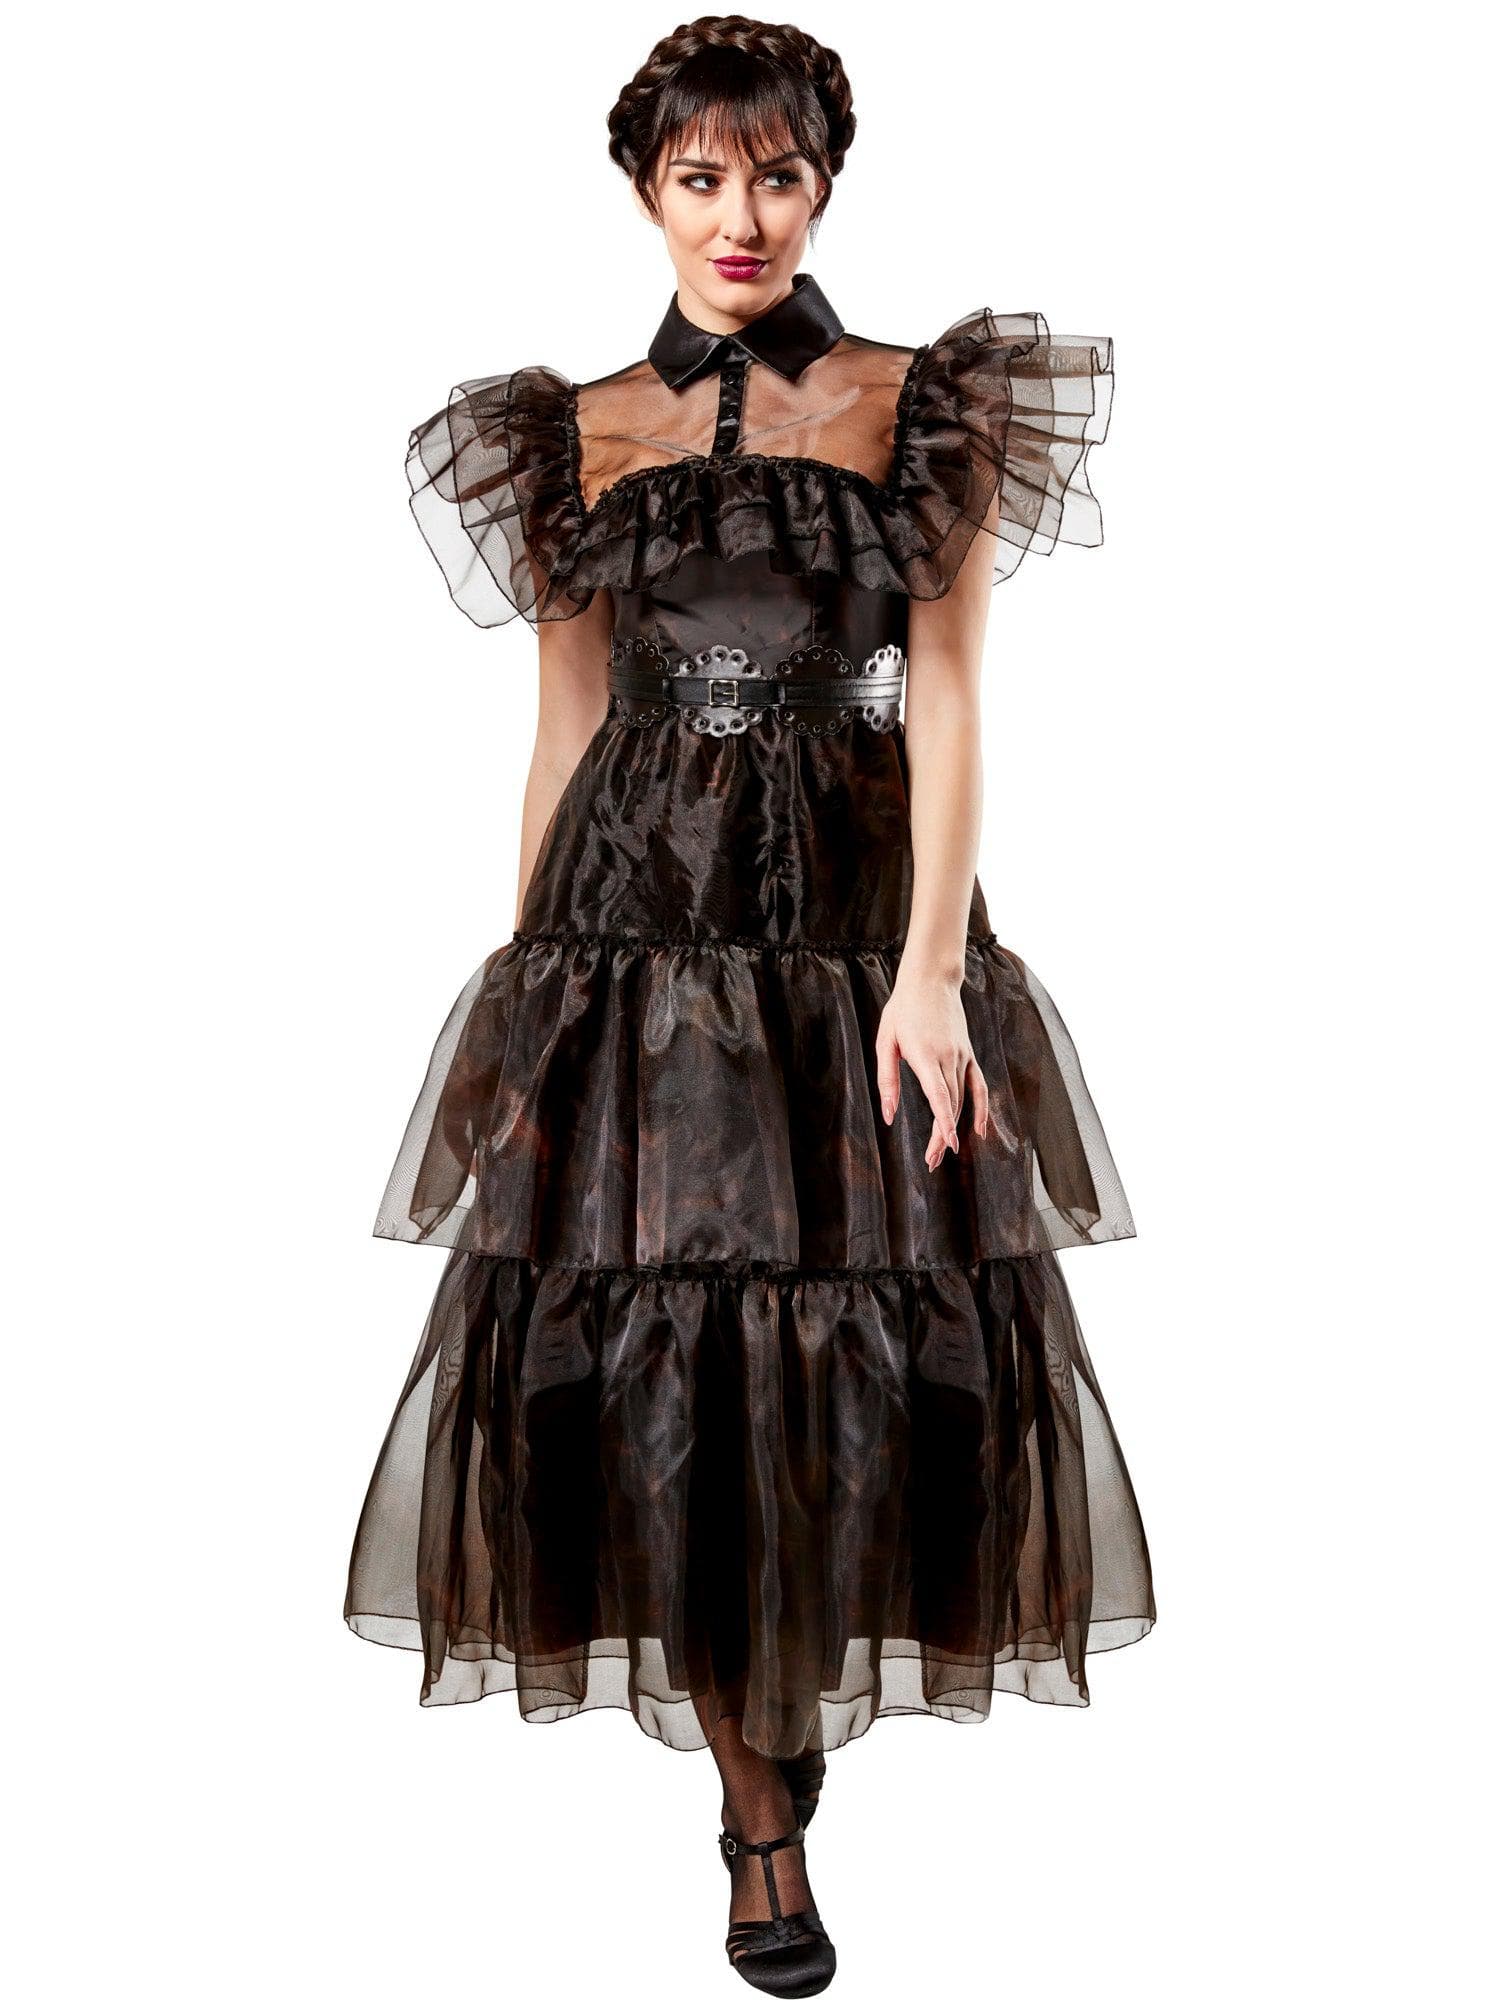 Wednesday Addams Nevermore Academy Rave'n Dance Women's Costume - costumes.com